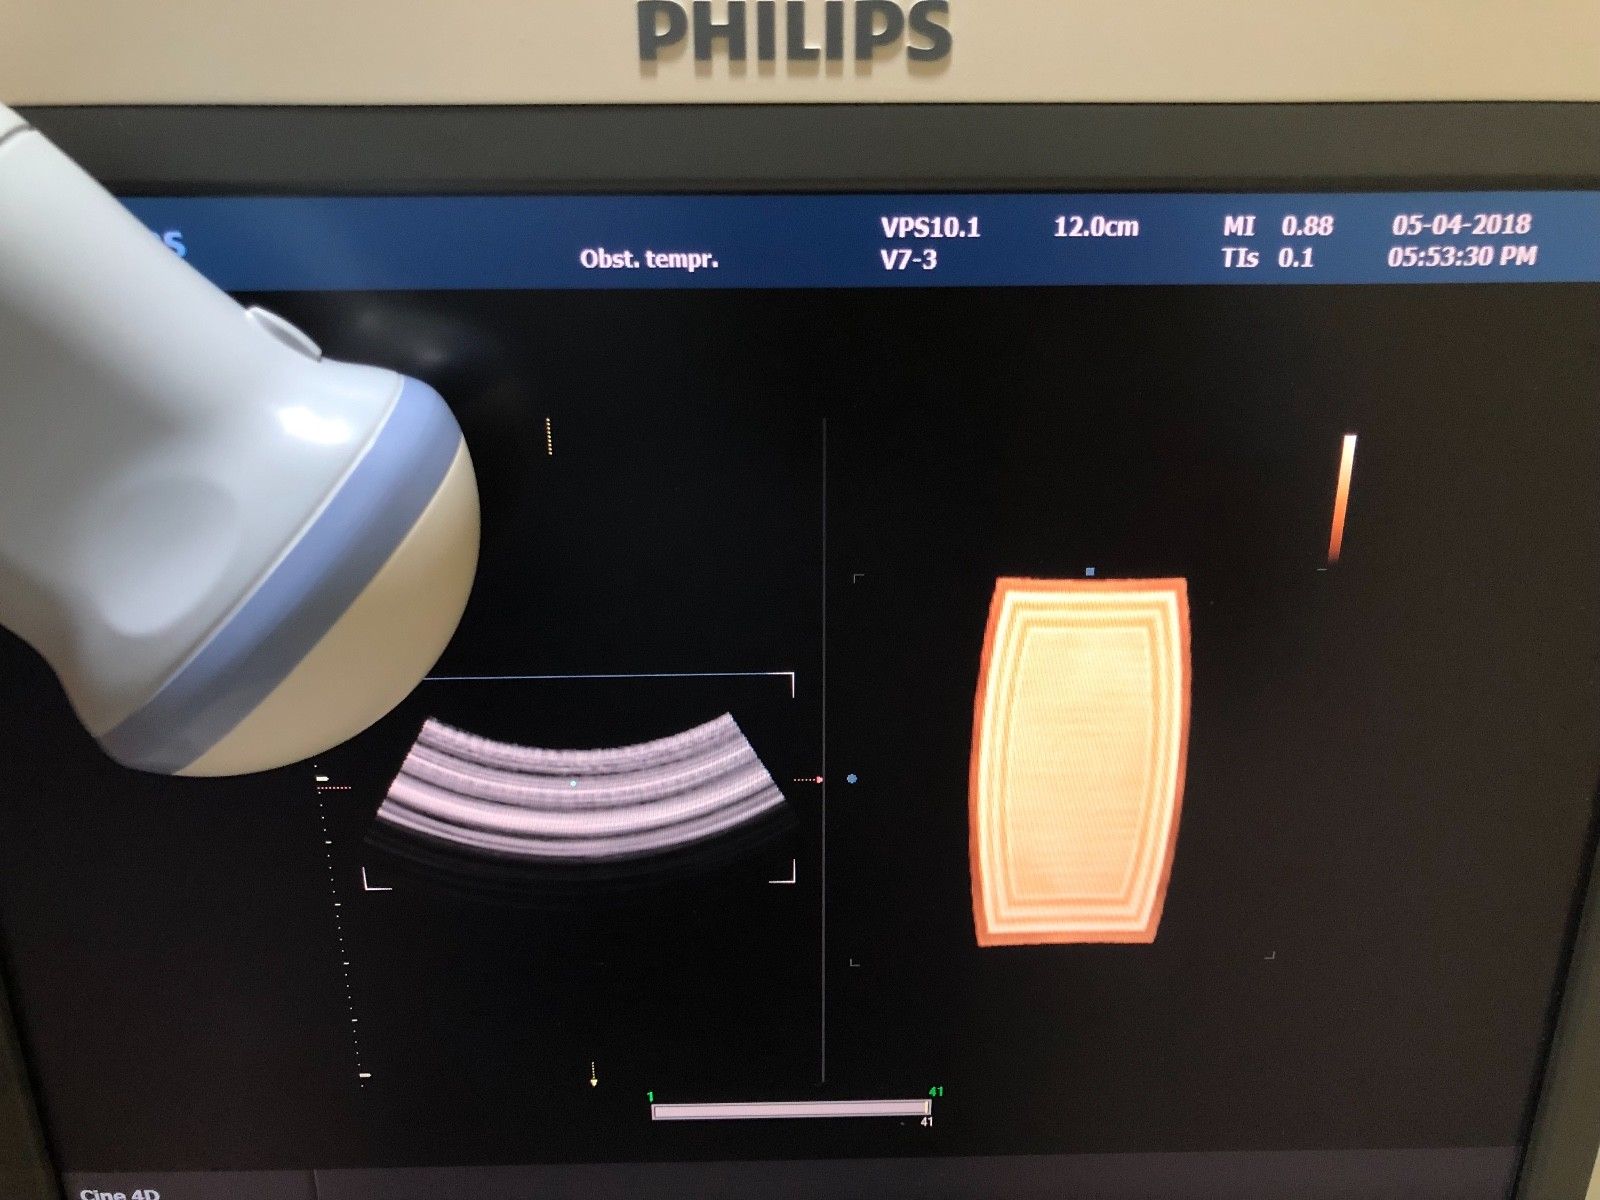 PHILIPS V7-3 4D CONVEX PROBE FOR HD9 DIAGNOSTIC ULTRASOUND MACHINES FOR SALE